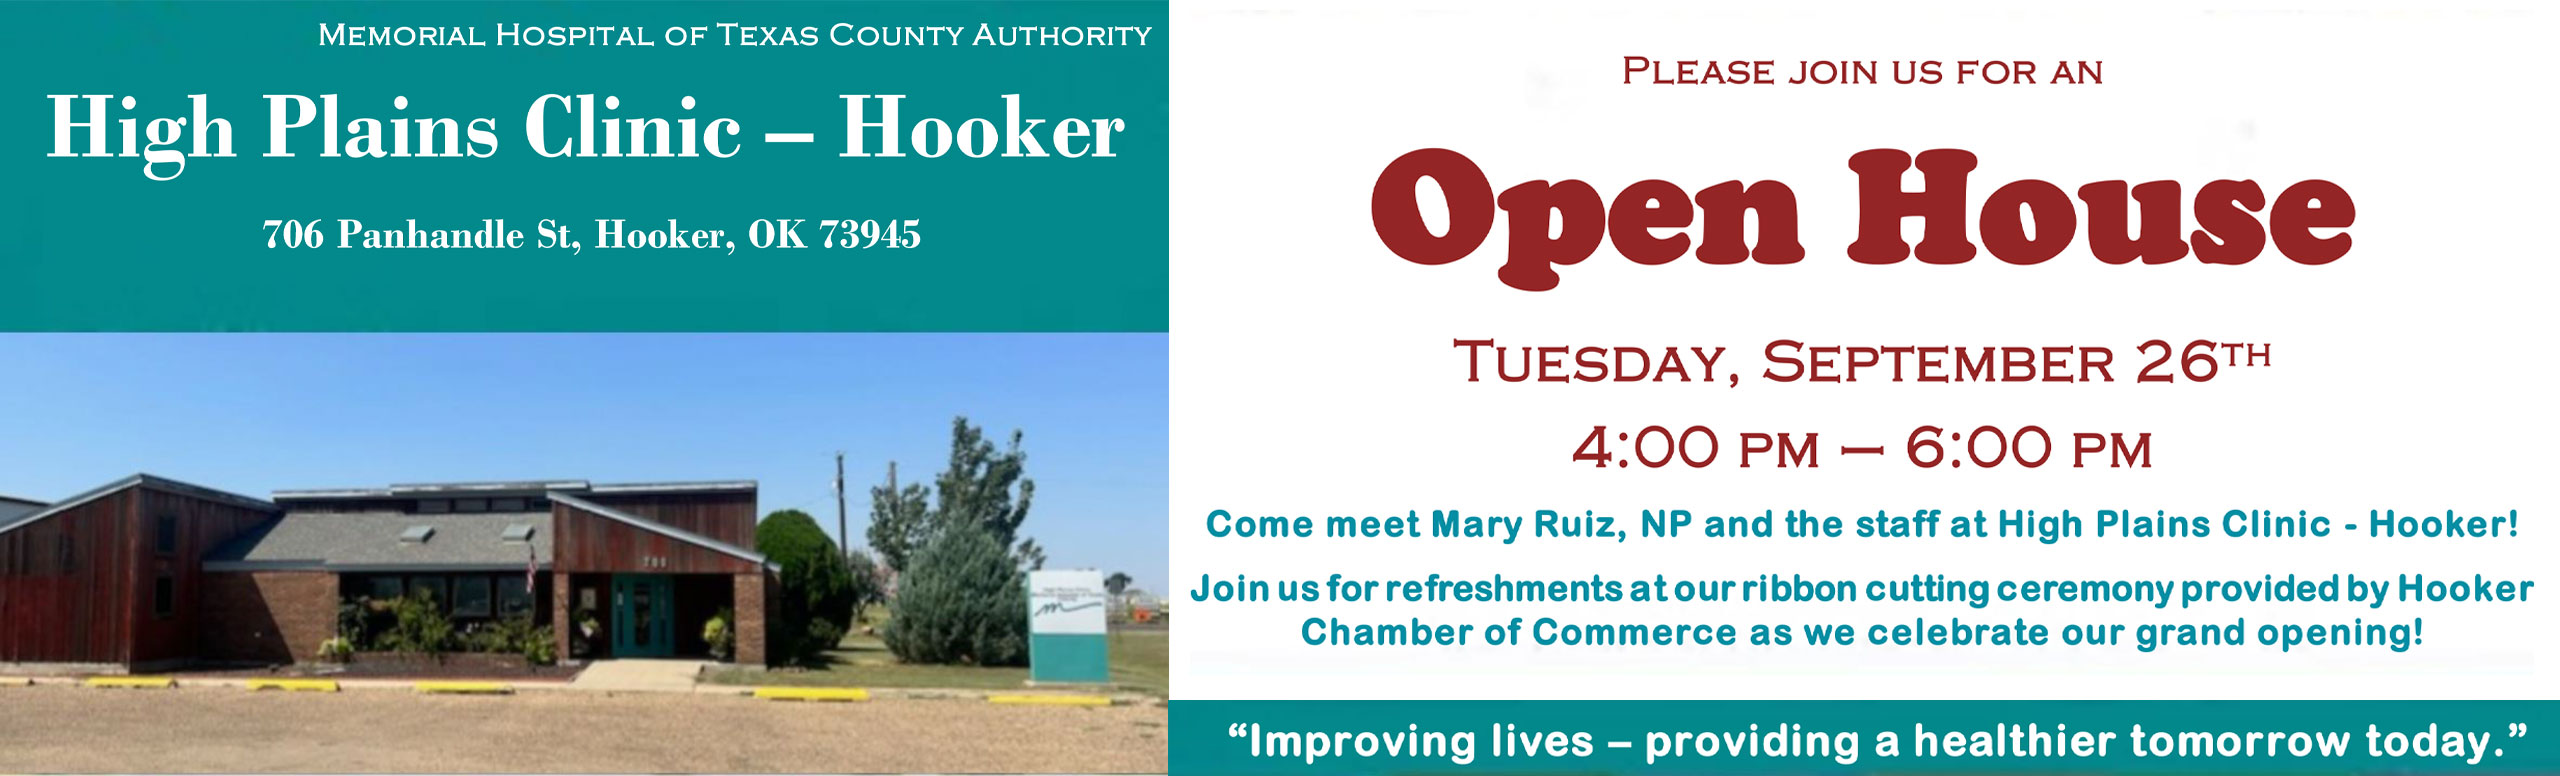 High Plains Clinic - Hooker
706 Panhandle St, Hooker, OK 73945

Please join us for an Open House
Tuesday, September 26th 4:00pm-6:00pm

Come meet Mary Ruiz, NP and the staff at High Plains Clinic - Hooker!